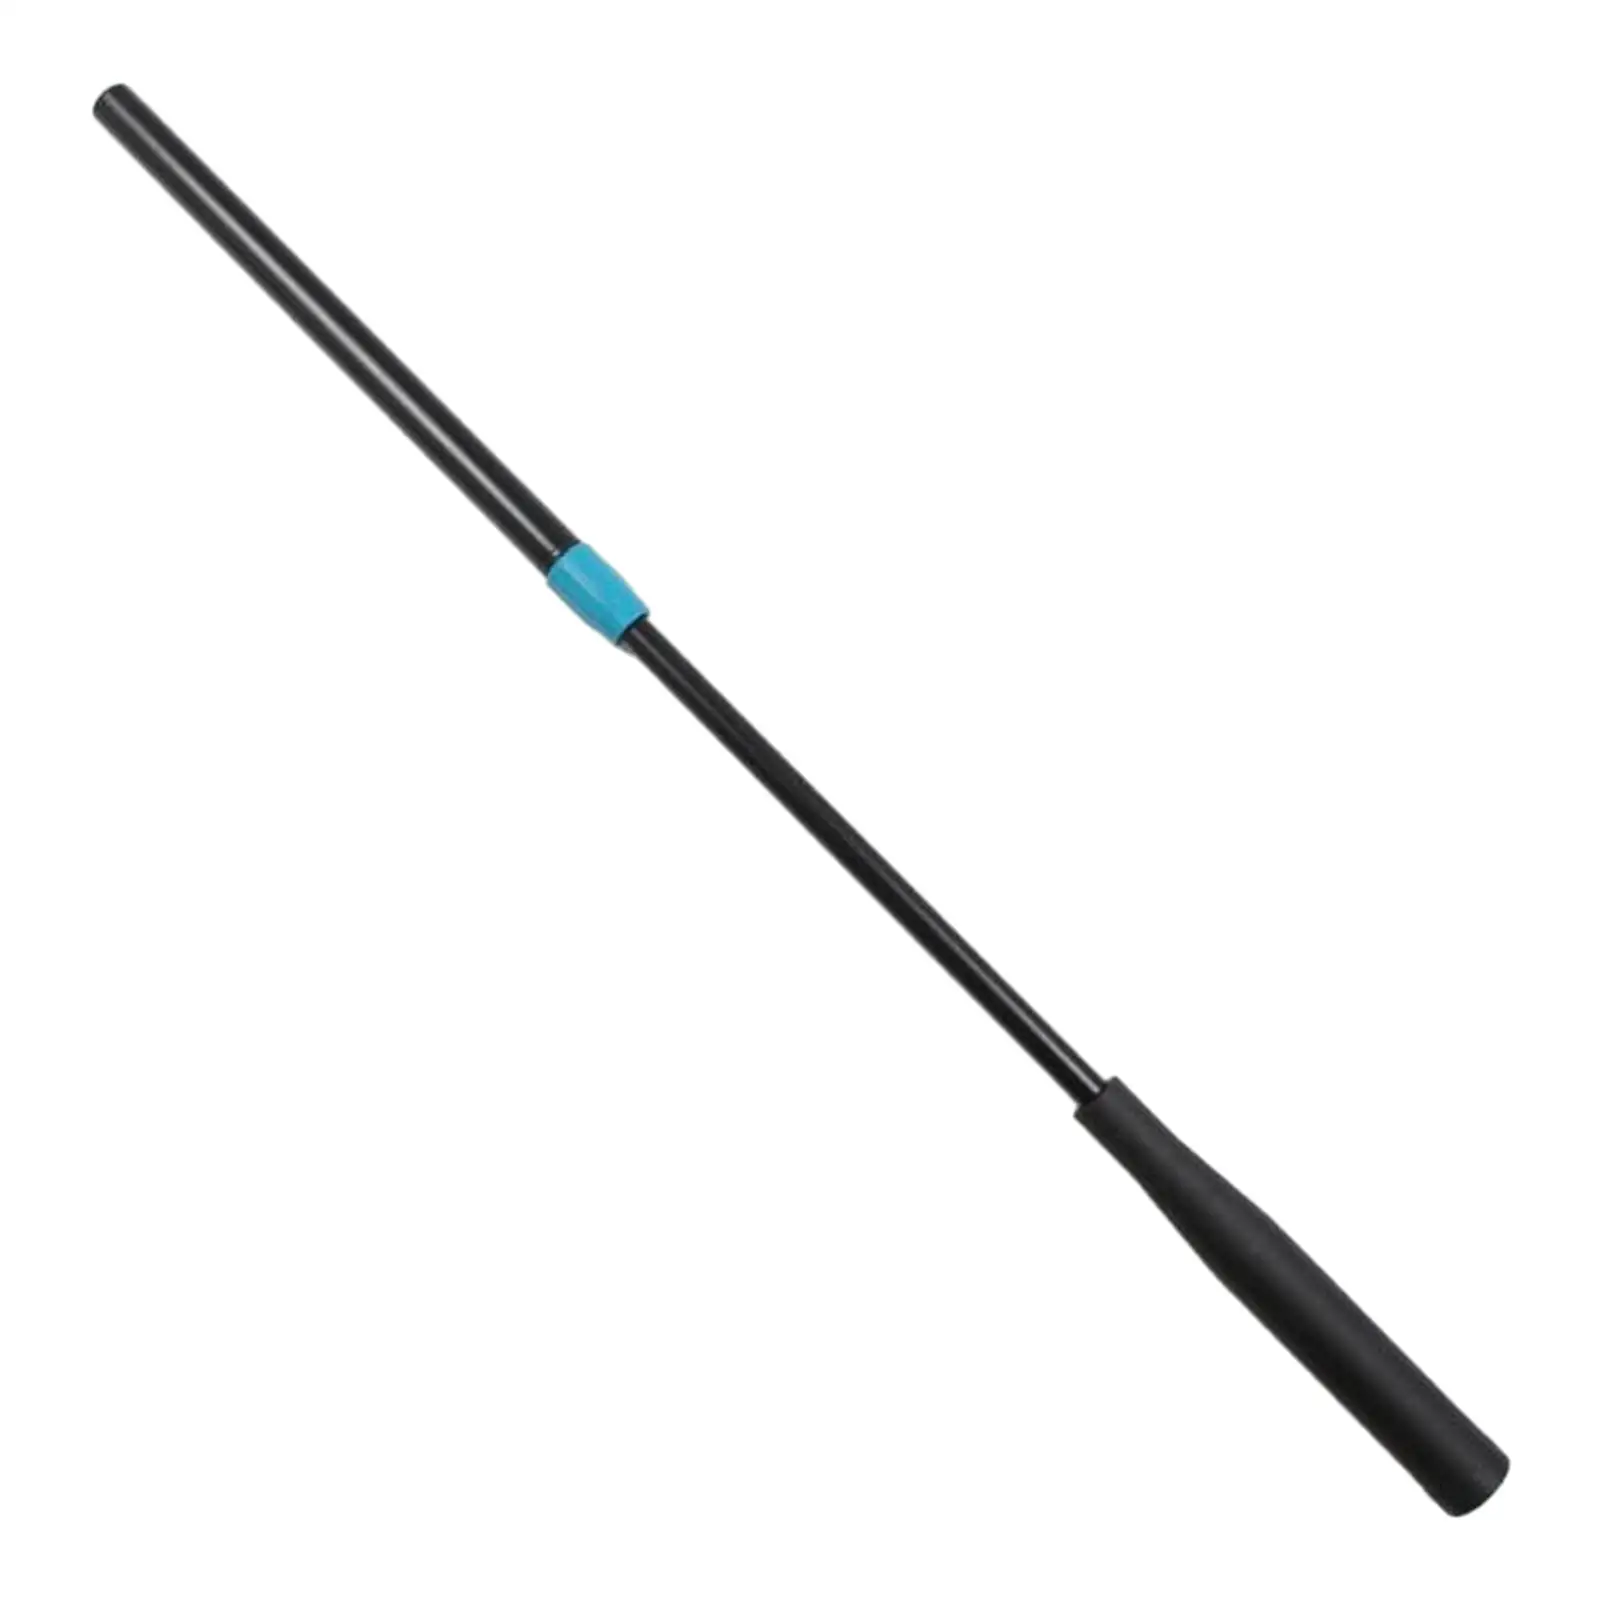 Snooker Pool Cue Extension, Professional High Strength Tool, Telescopic Billiard